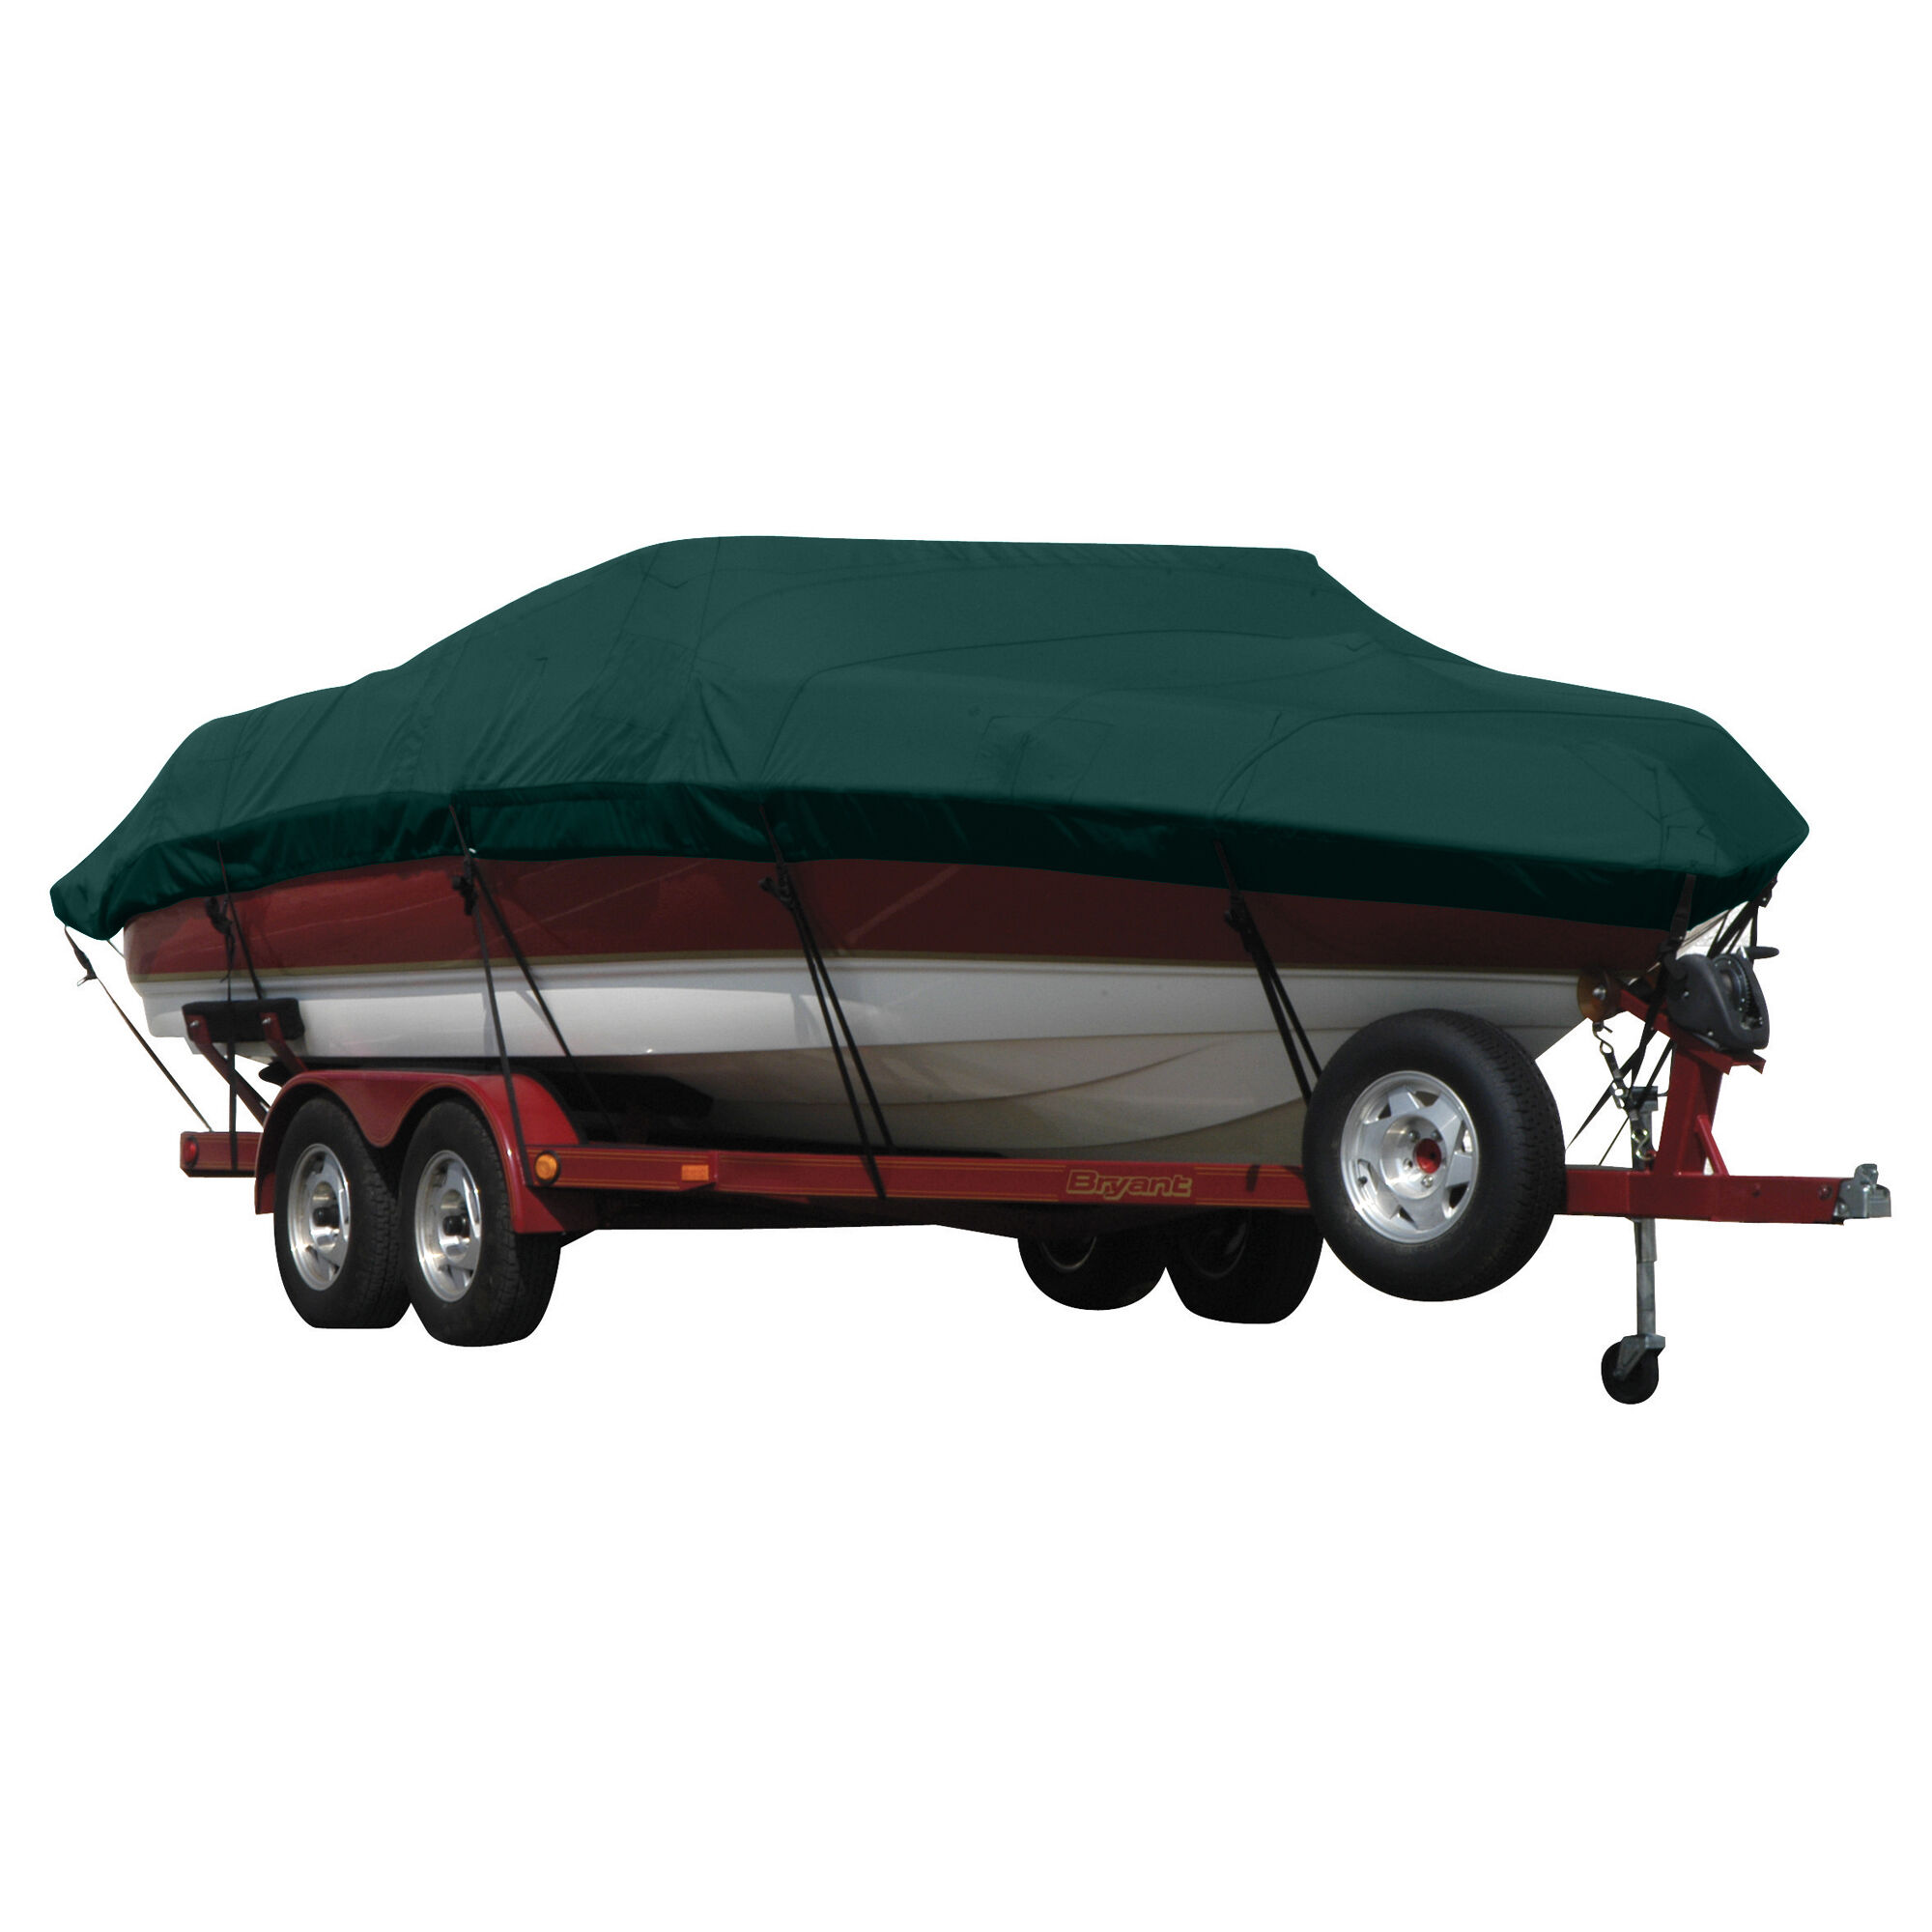 Covermate Exact Fit Sunbrella Boat Cover for Lund 1660 Pro V Dlx 1660 Pro V Dlx No Shield No Trolling Motor O/B. Forest Green